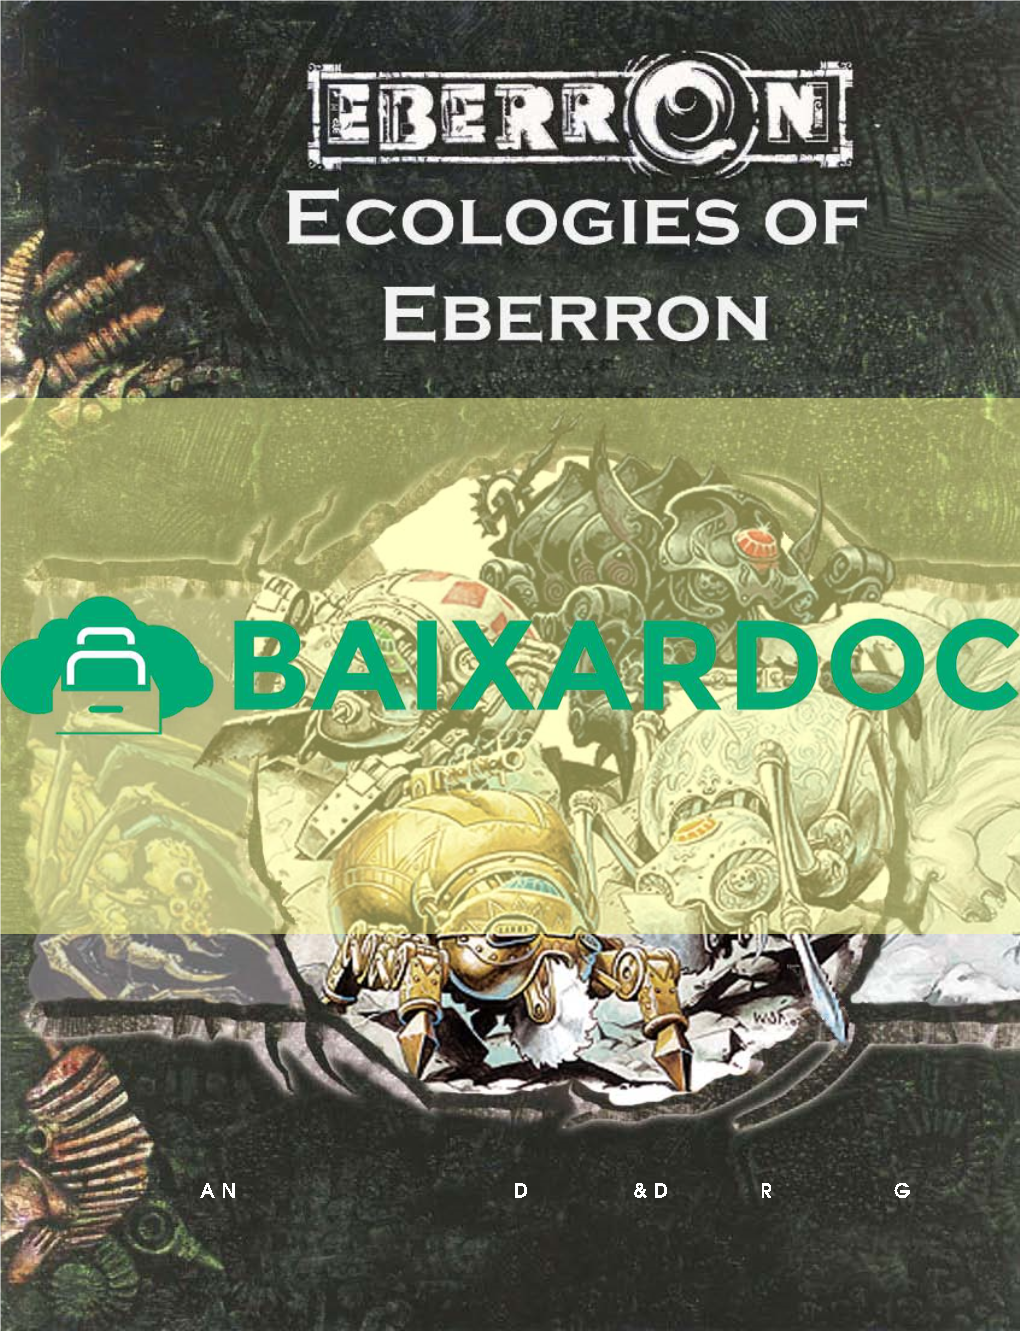 Eberron Forum and Is Offered to Fans of the Eberron Campaign Setting As a Gaming Tool